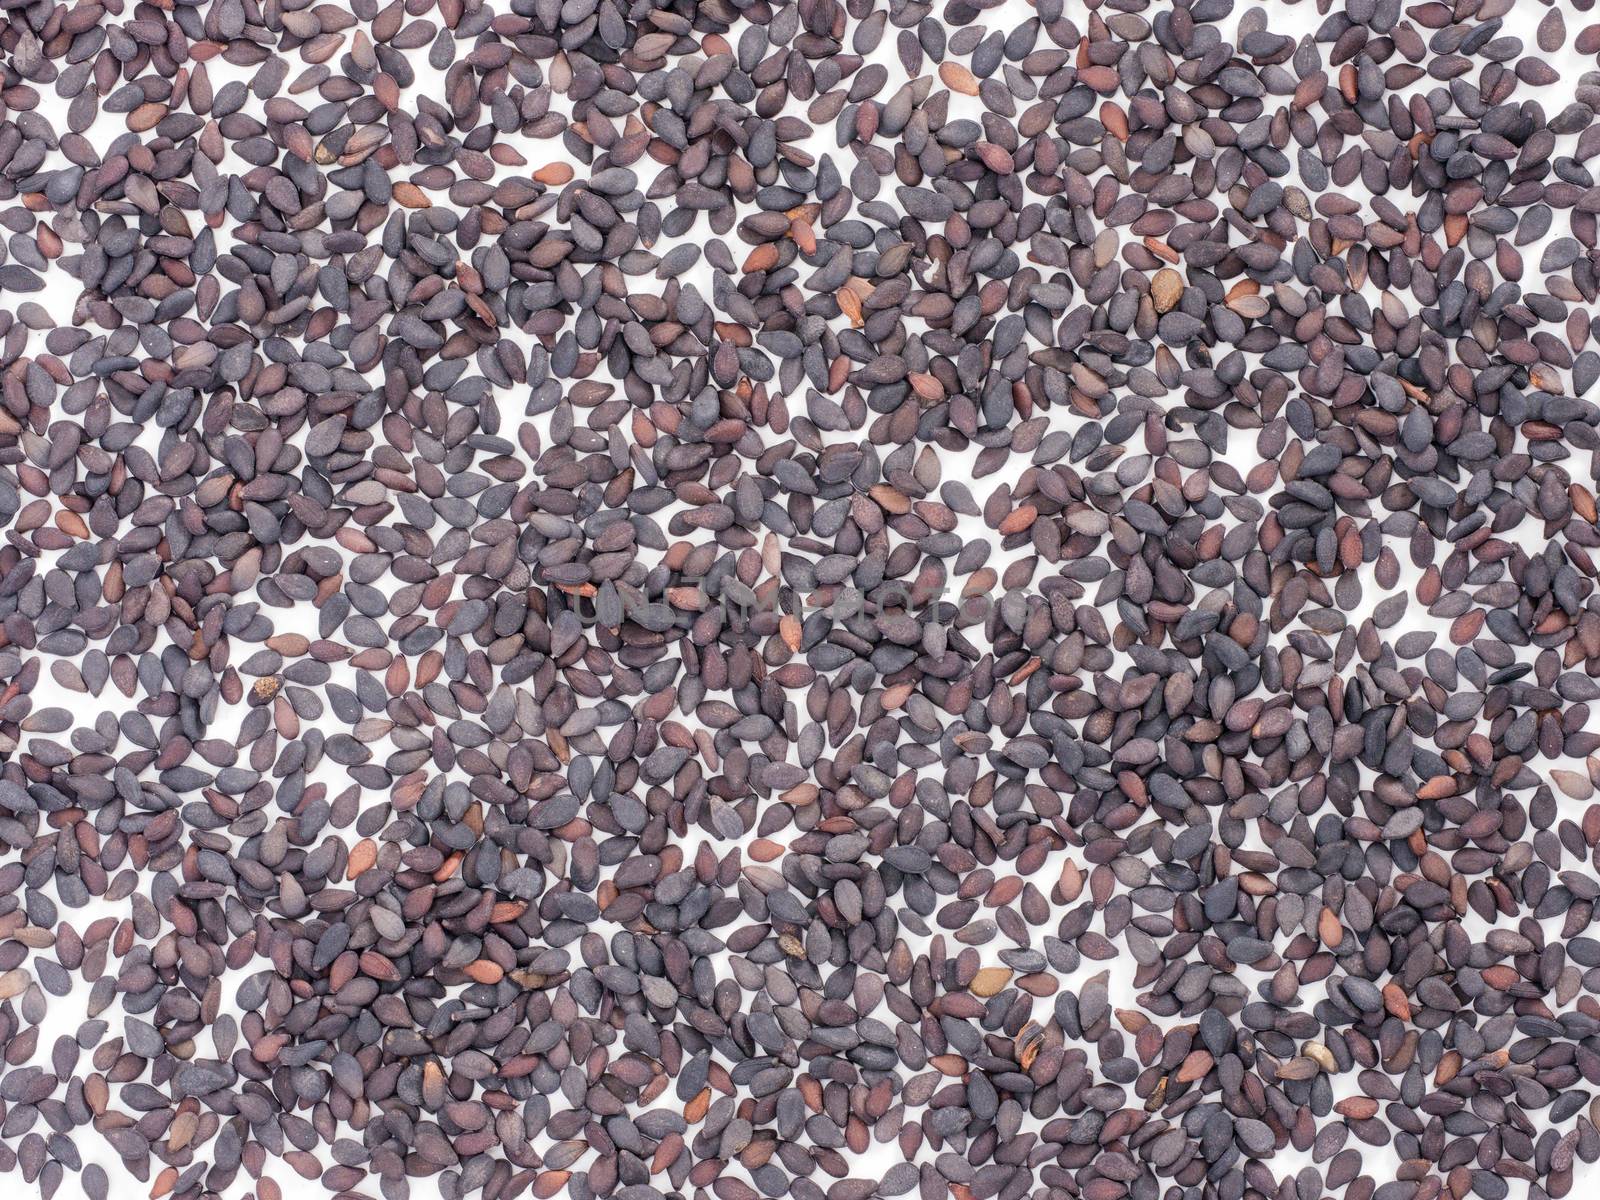 Black sesame as background. Top view or flat lay